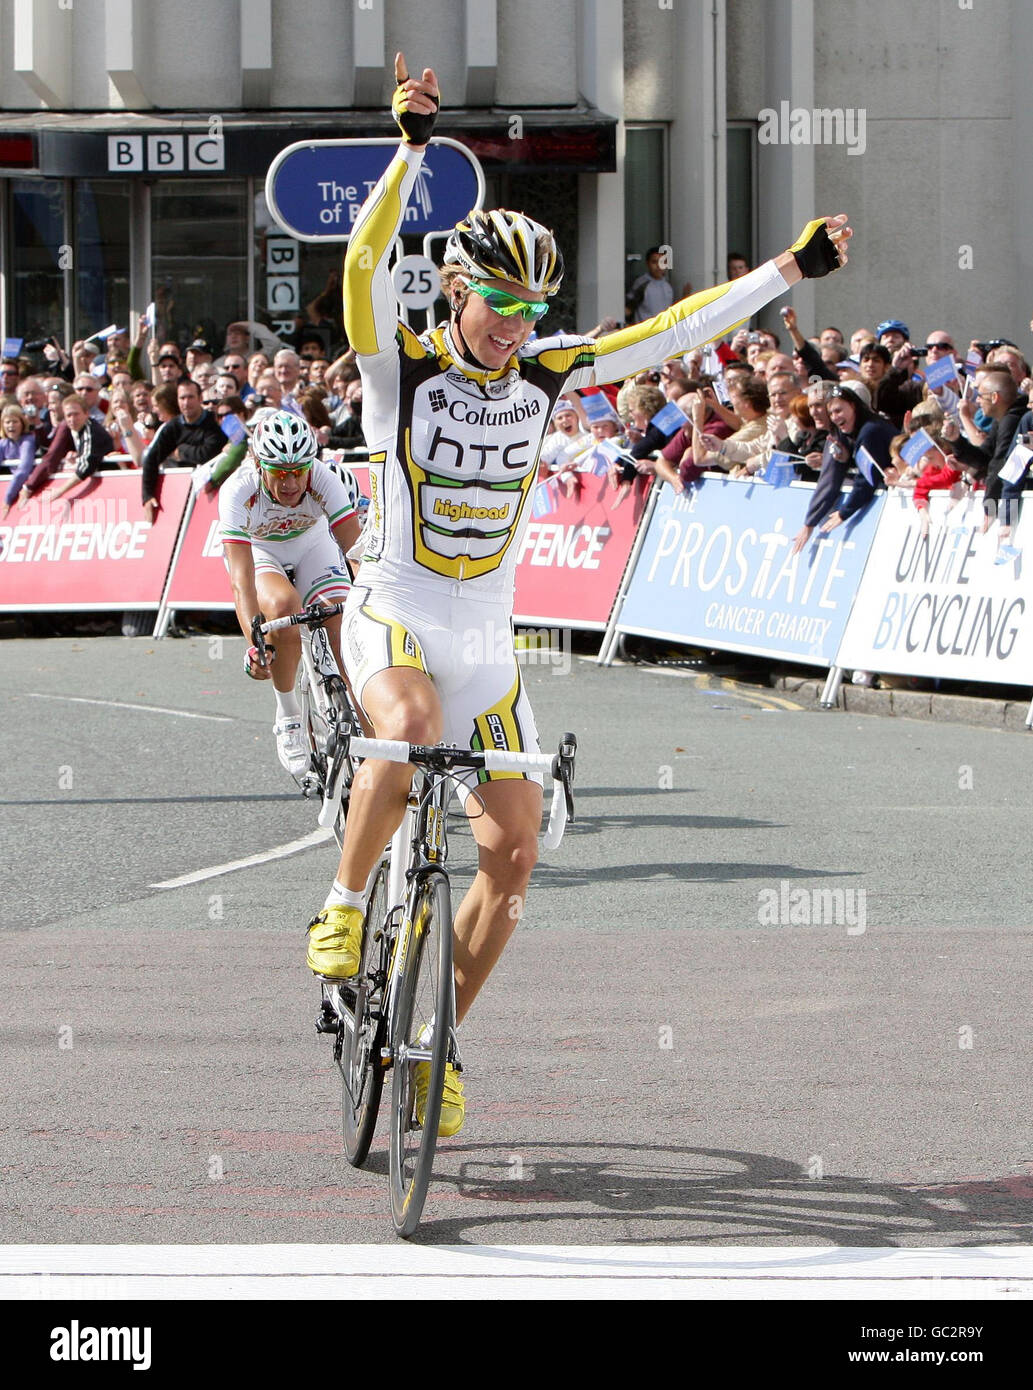 Columbia HTC rider Edvald Boasson Hagen from Norway wins during stage Five of the Tour of Britain in Stoke-On-Trent. Stock Photo